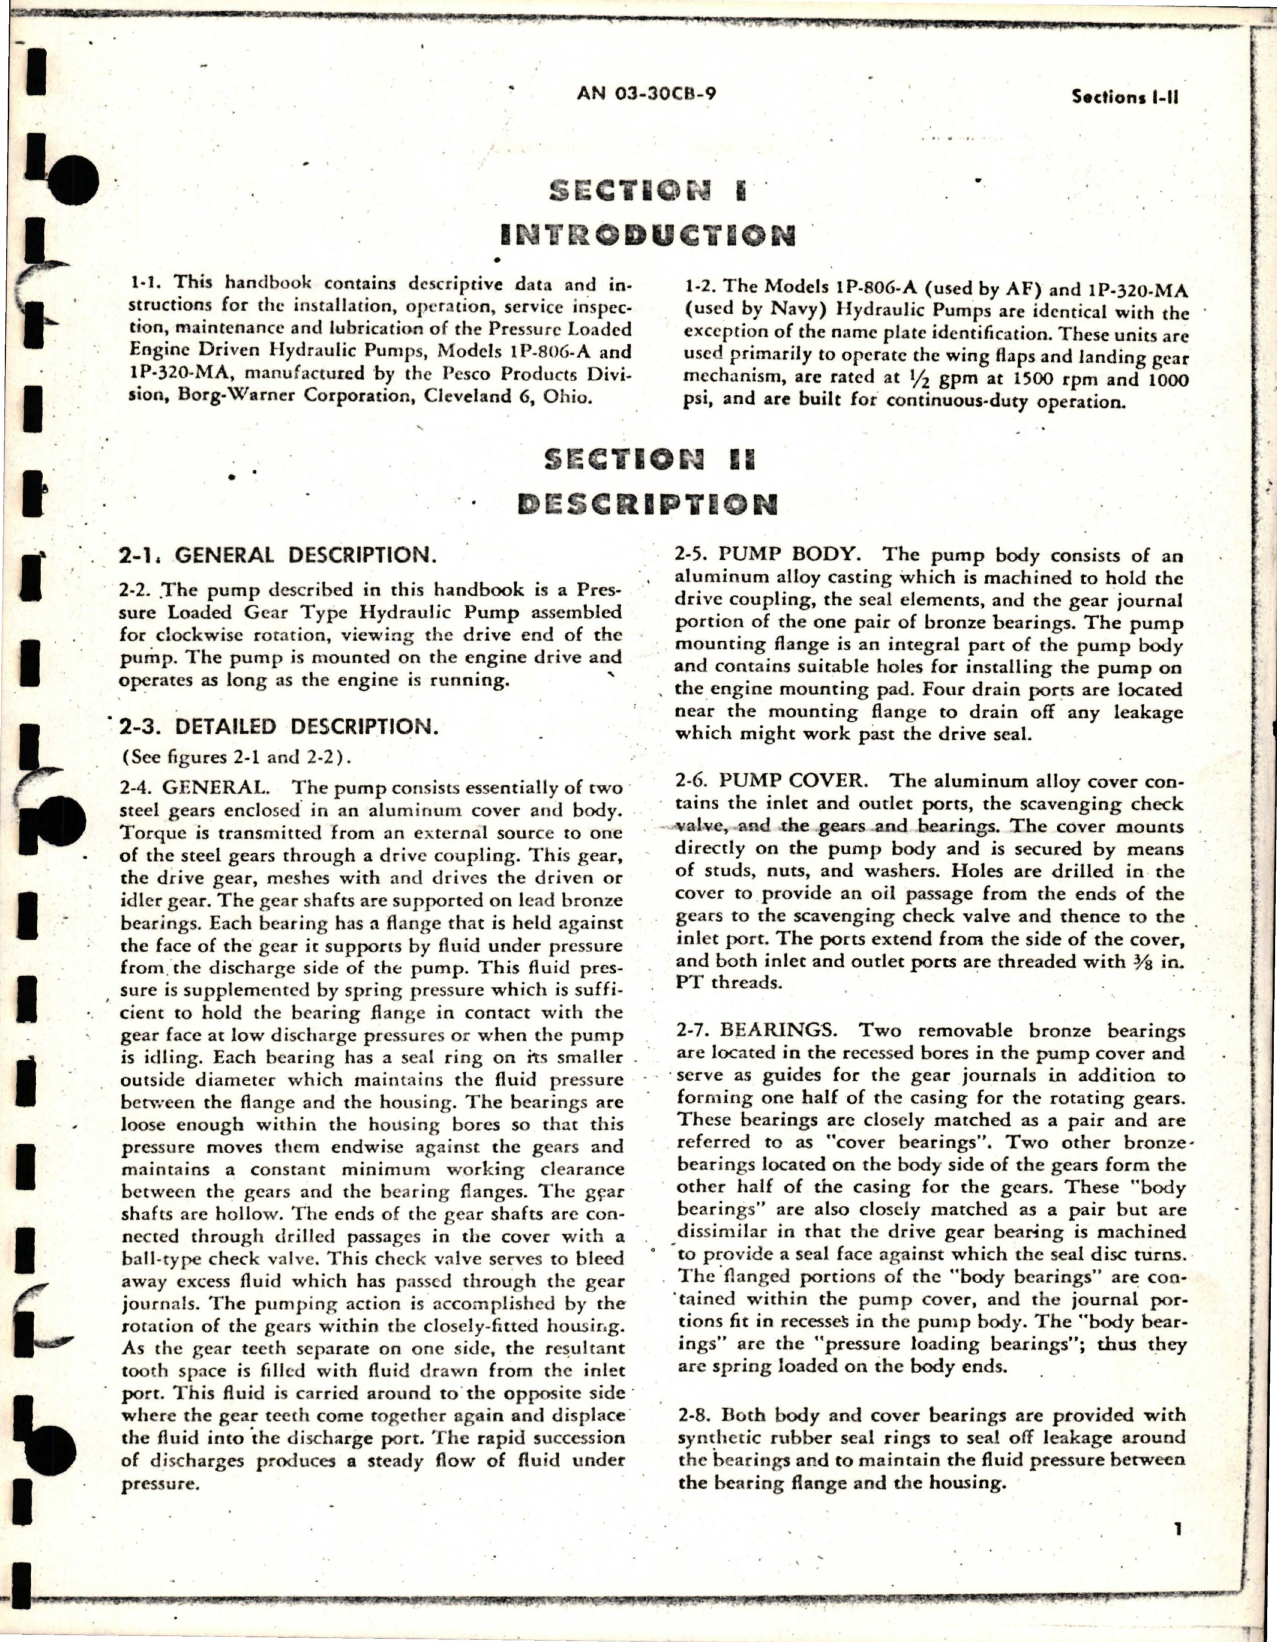 Sample page 5 from AirCorps Library document: Operation and Service Instructions for Pressure Loaded, Engine Driven, Gear Type Hydraulic Pumps - Models 1P-806-A and 1P-320-MA